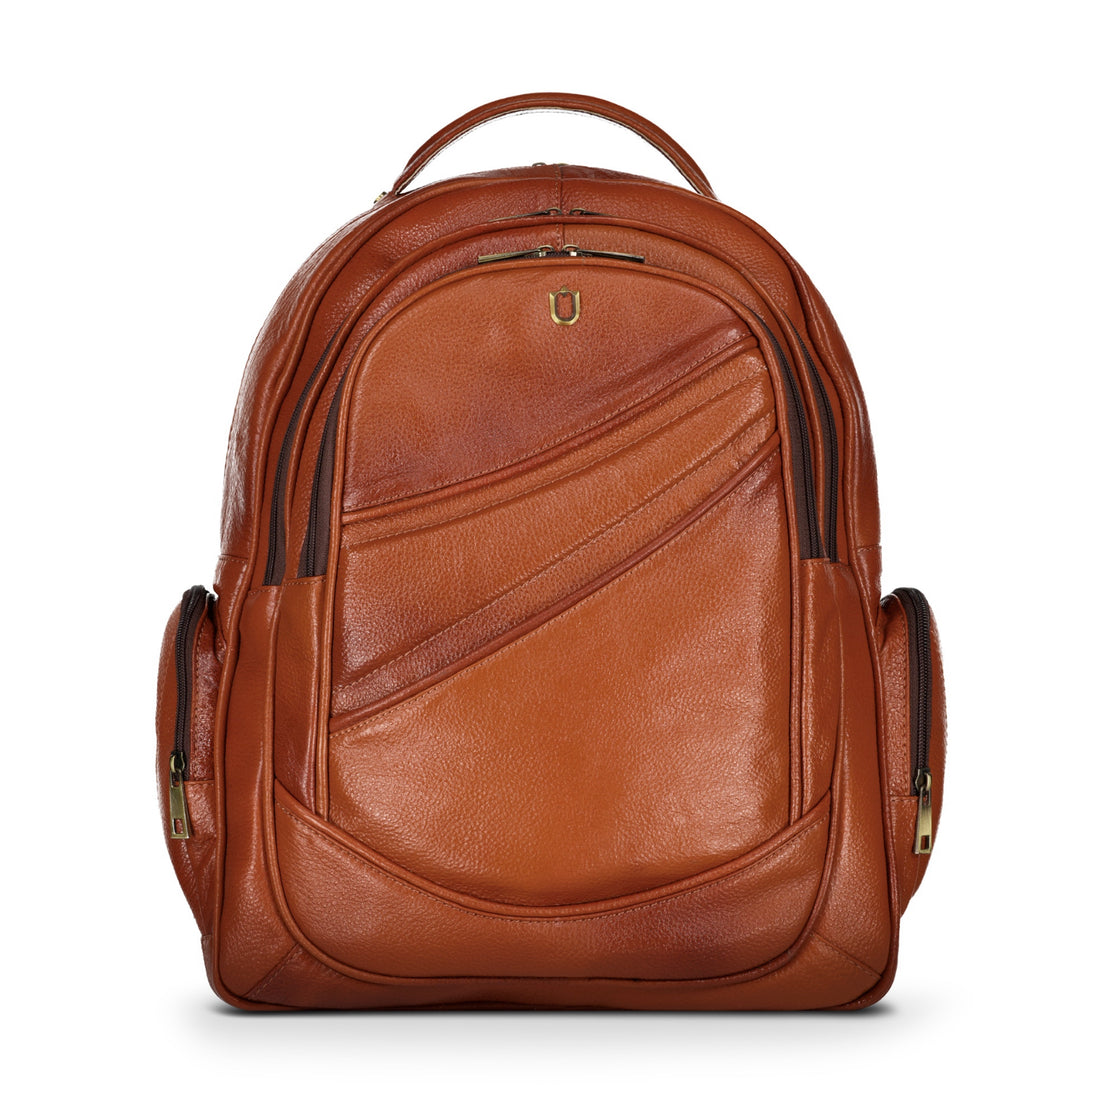 The Suza Backpack - Tan - Bags by Urbbana